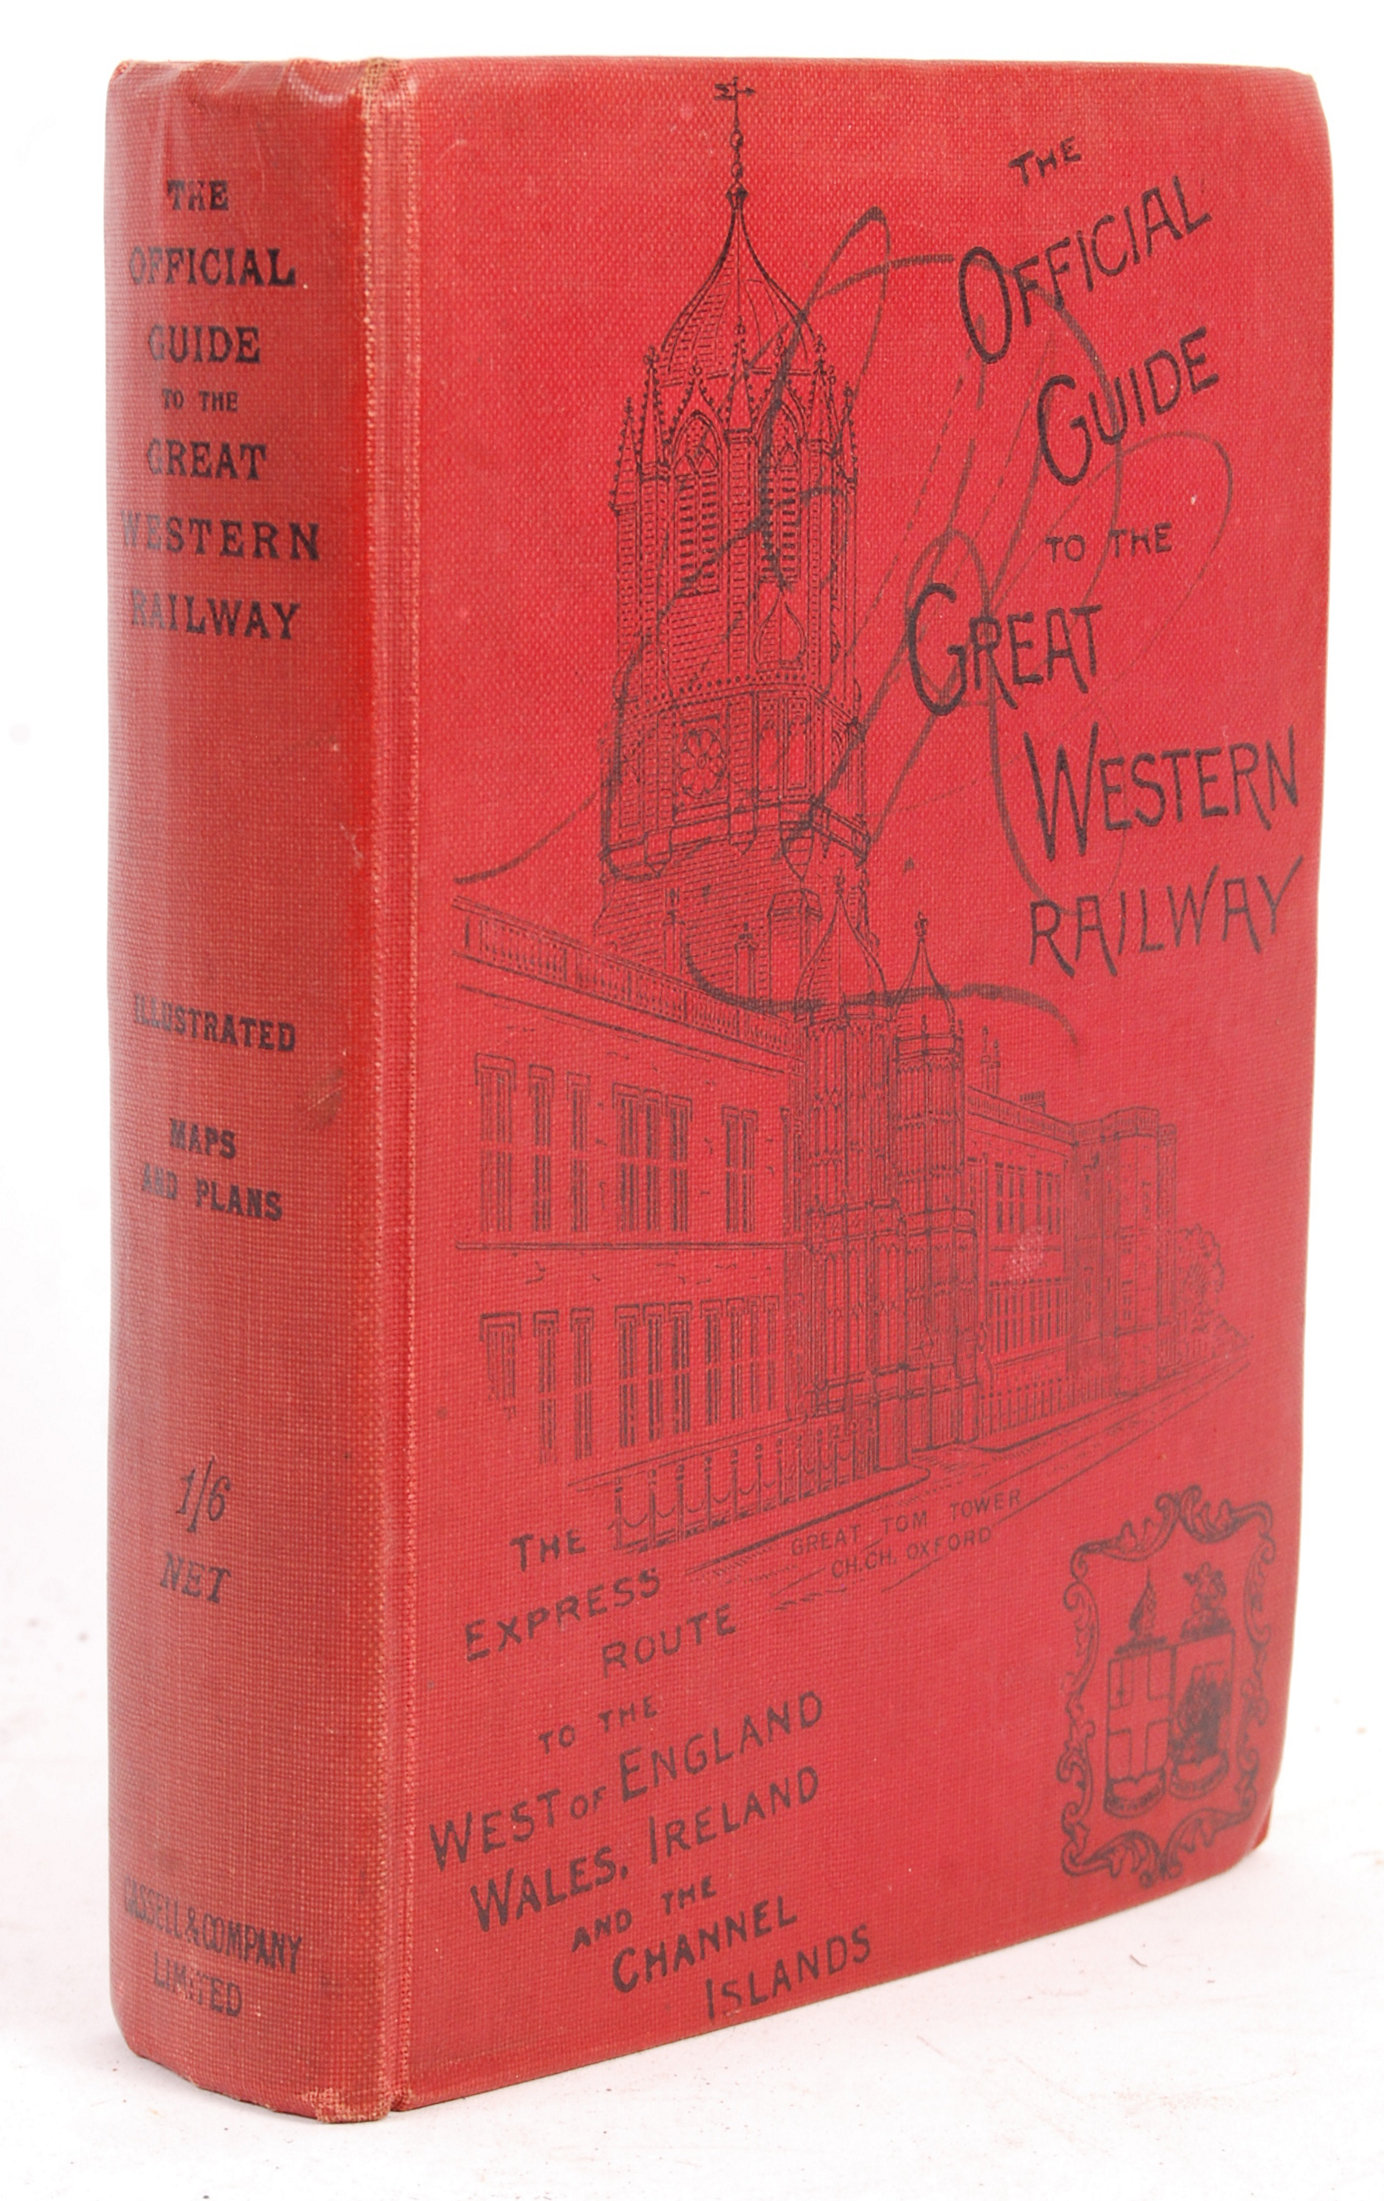 CHARMING RARE OFFICIAL GUIDE TO GREAT WESTERN RAILWAY 1911